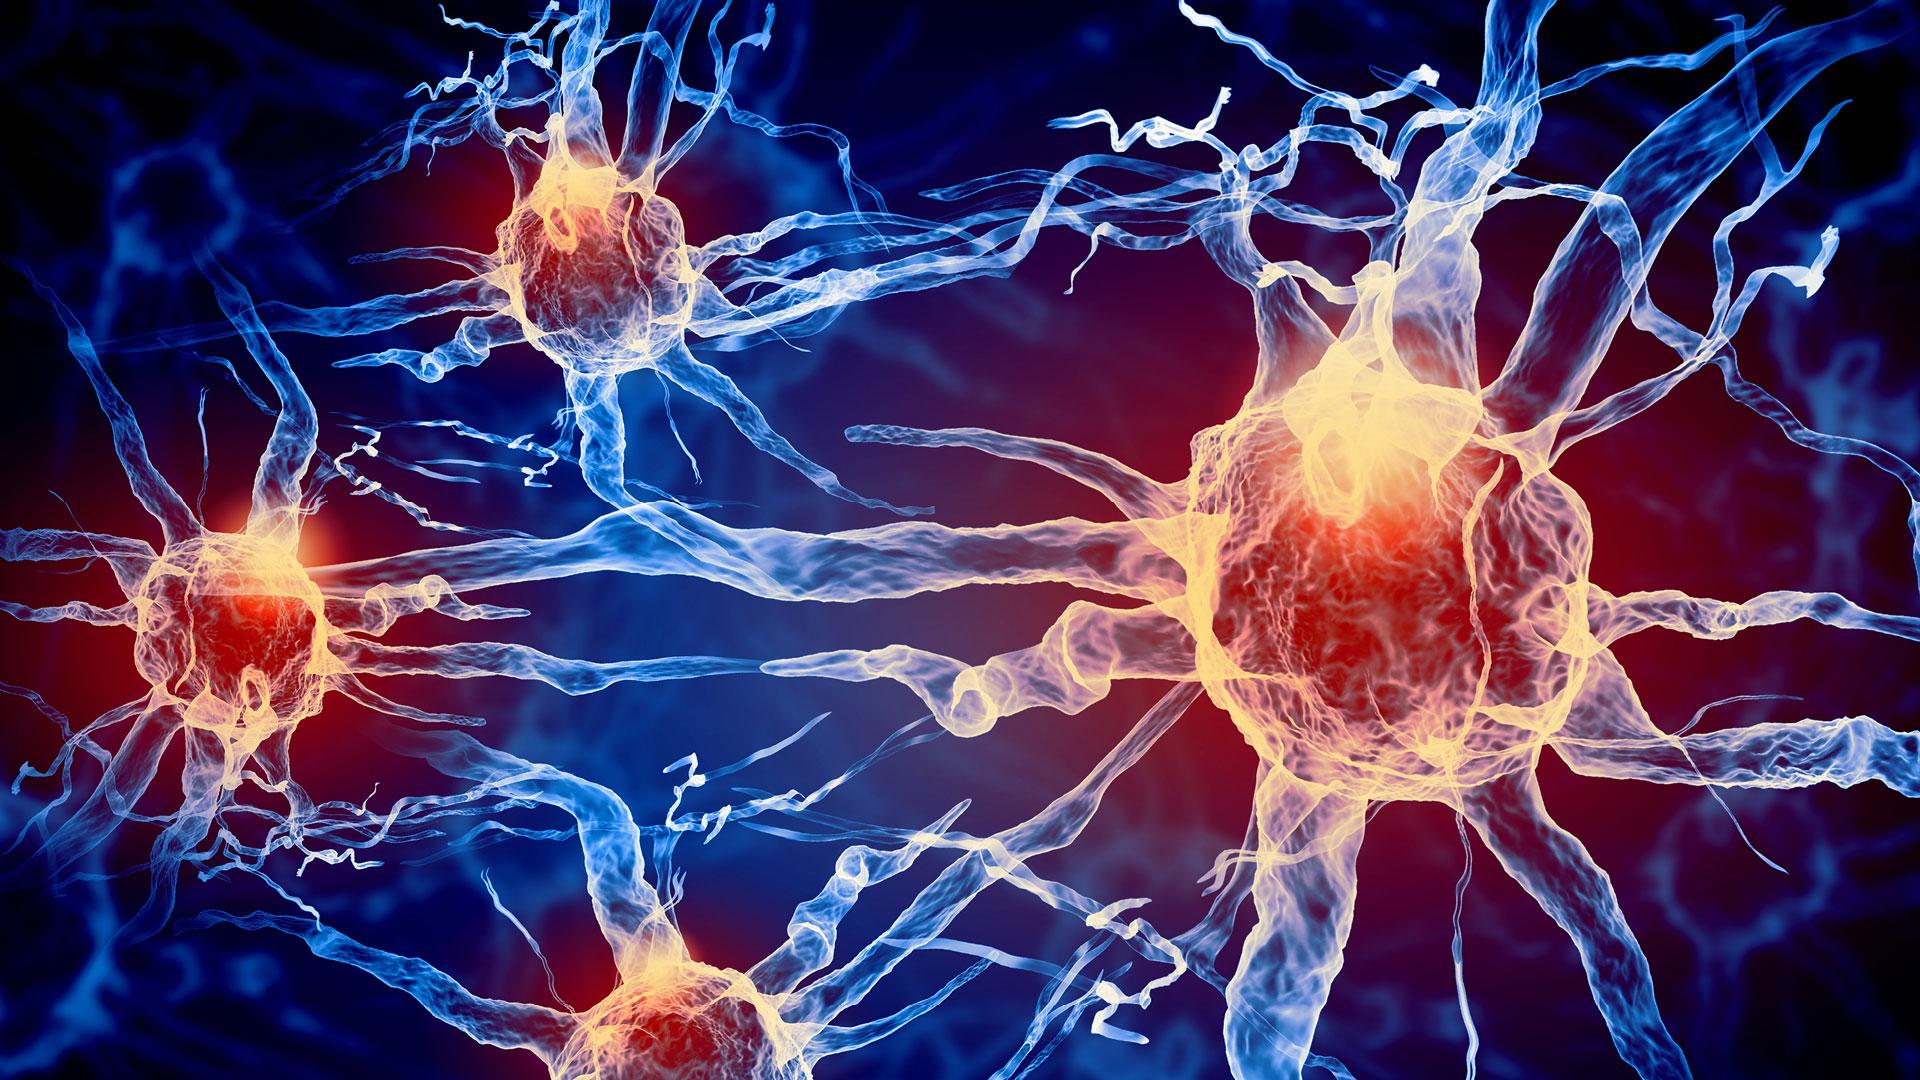 Frontiers  Therapeutic Advances in Multiple Sclerosis